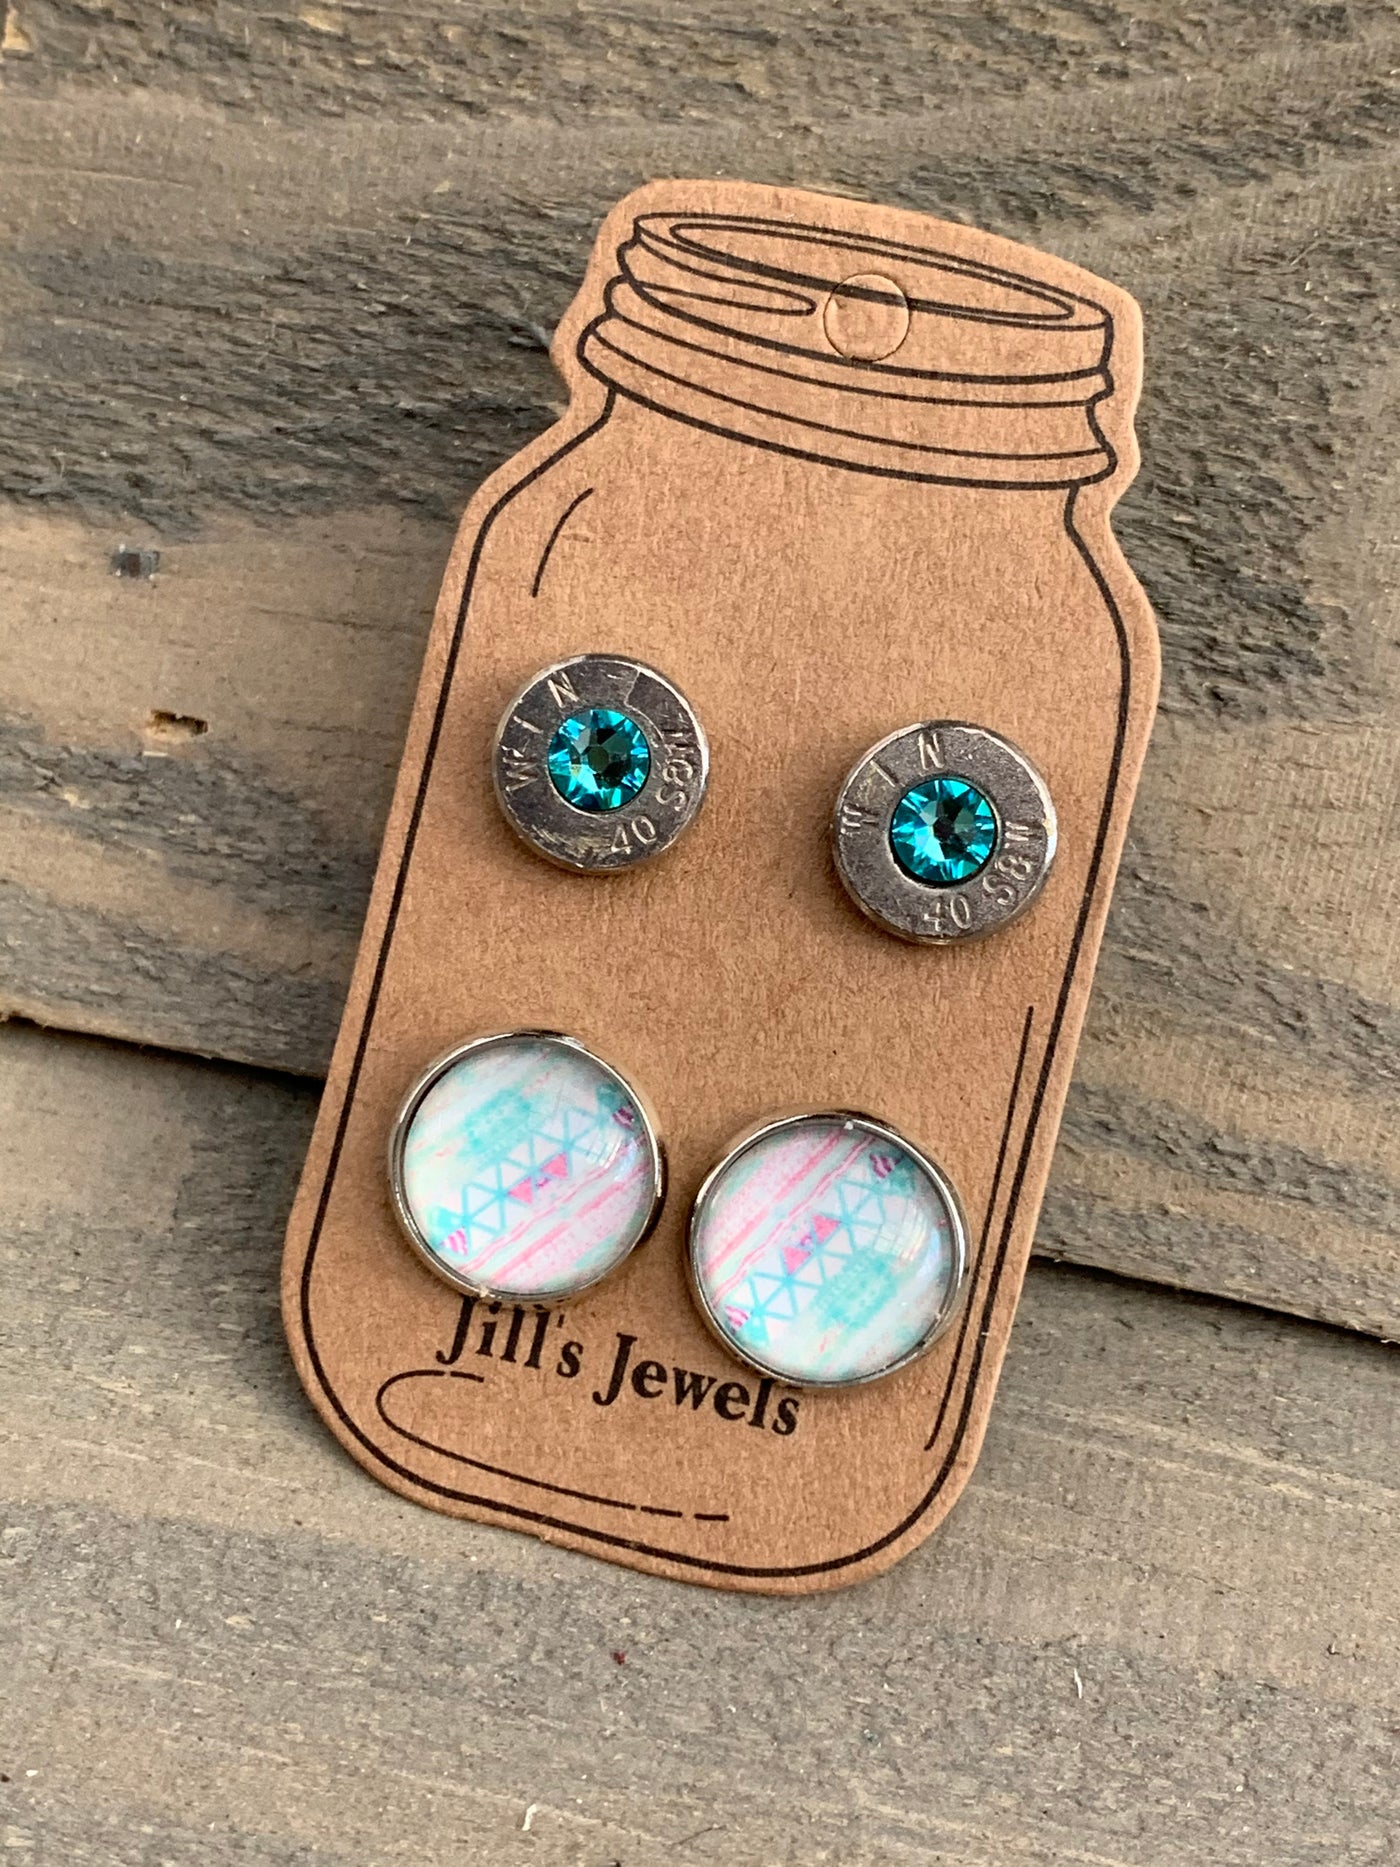 Mint Pastel Aztec 40 Caliber bullet earring set - Jill's Jewels | Unique, Handcrafted, Trendy, And Fun Jewelry